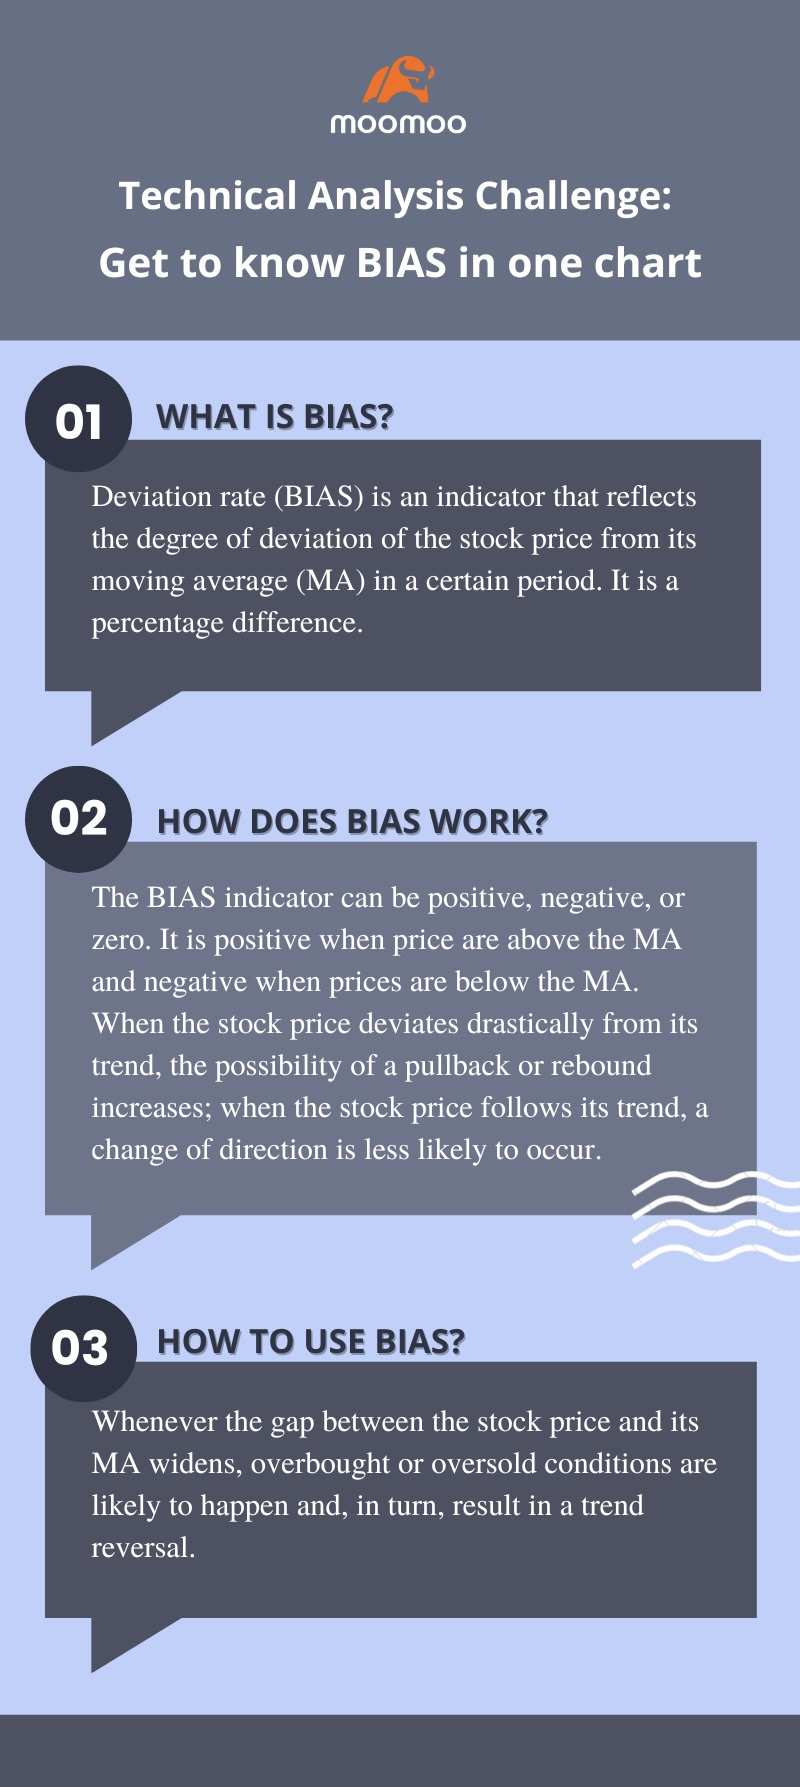 TA Challenge: Get to know BIAS in one chart